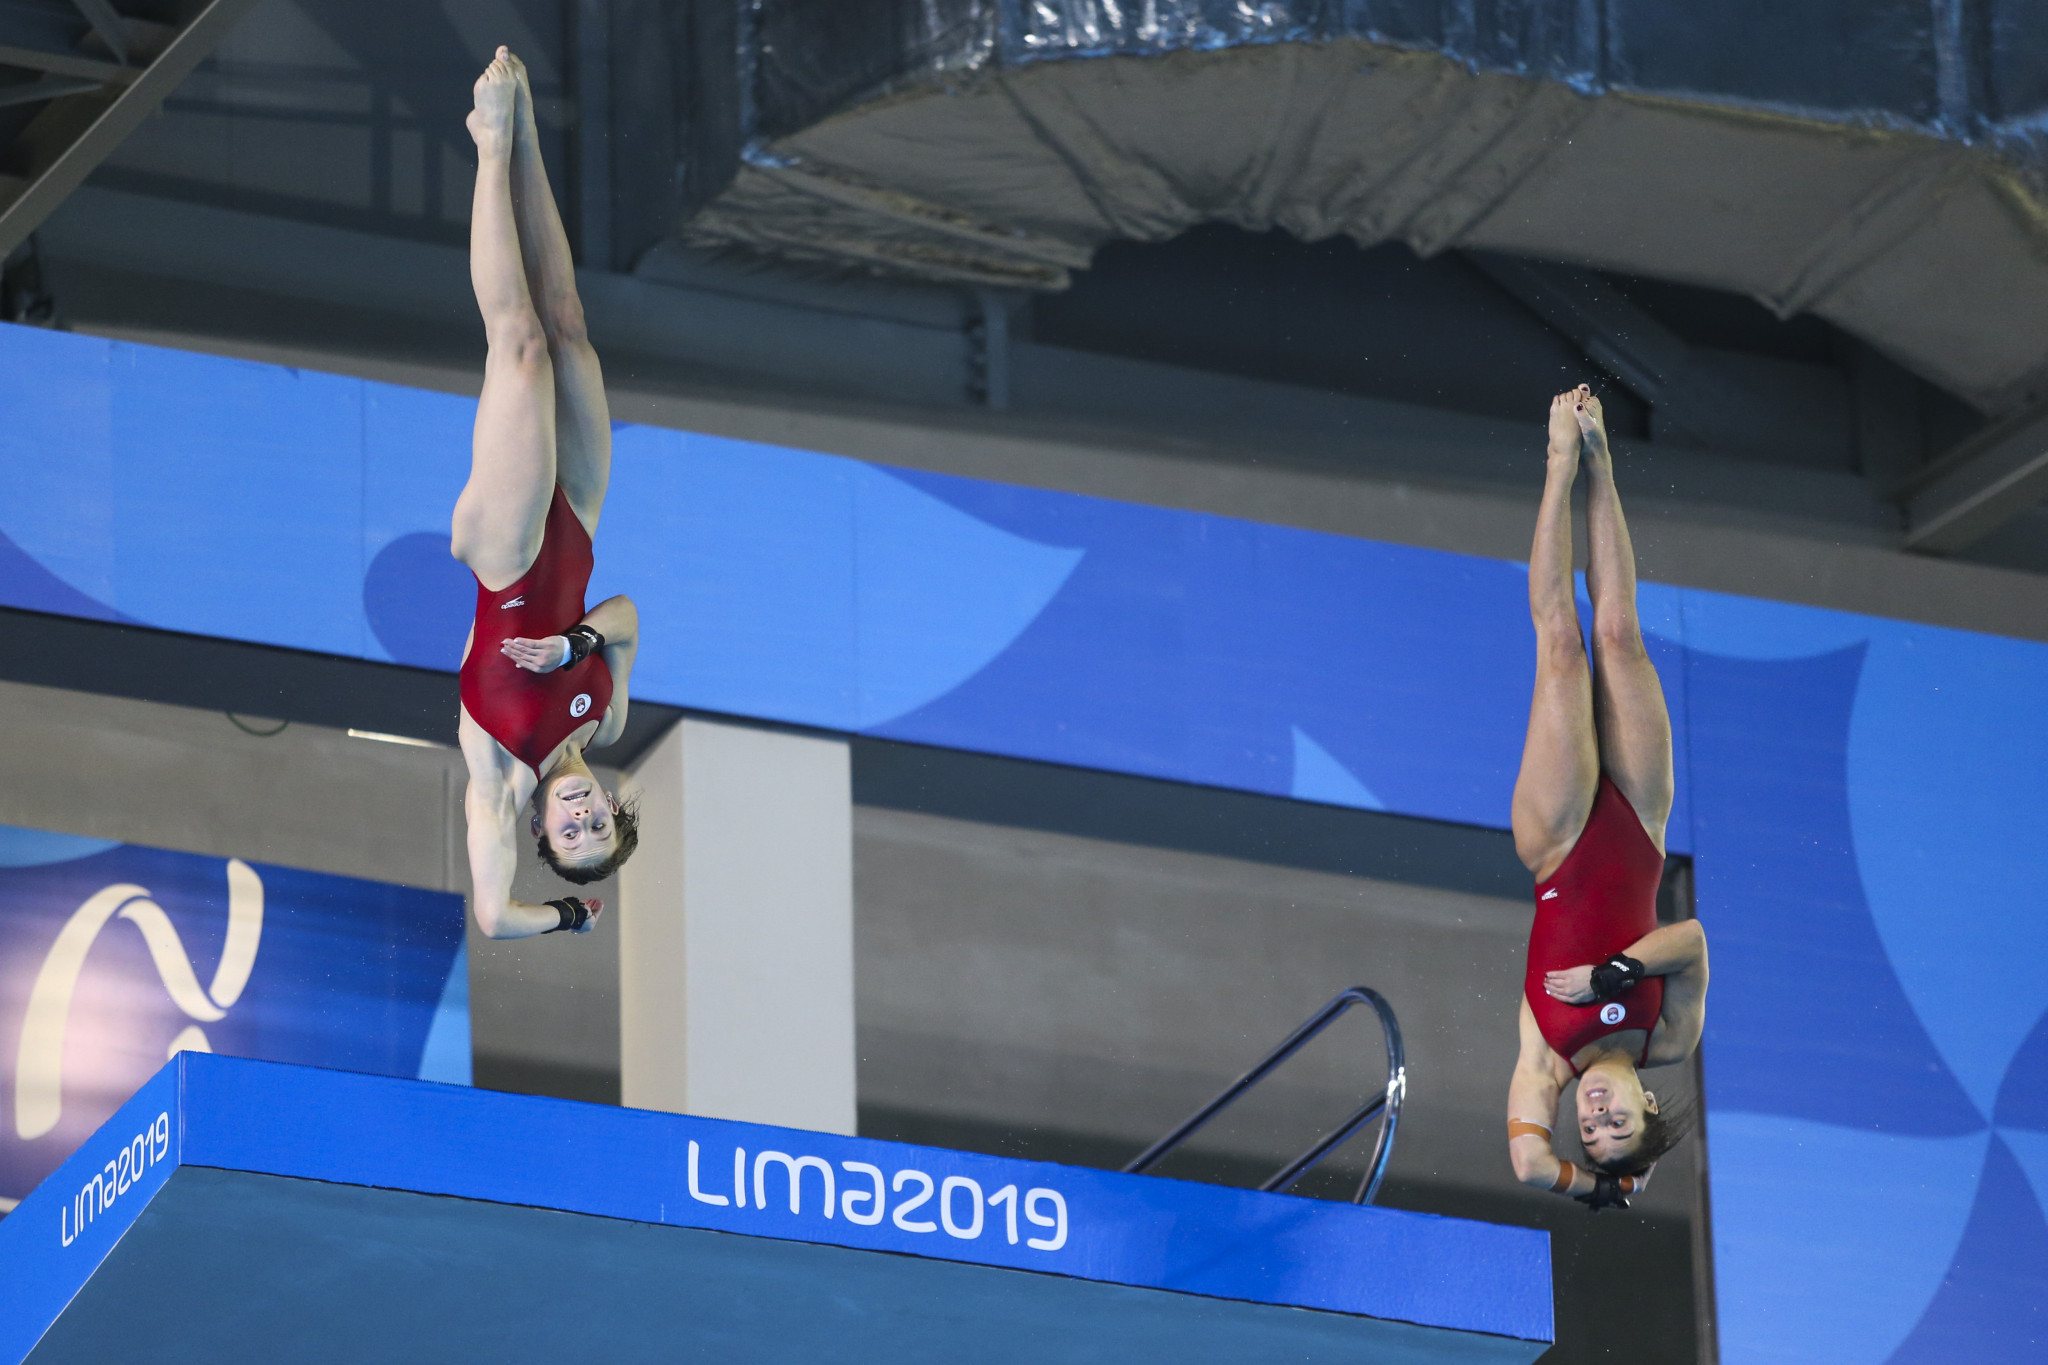 The day's action concluded with Canada's Meaghan Benfeito and Caeli McKay winning gold in the women's synchronised 10m platform ©Lima 2019